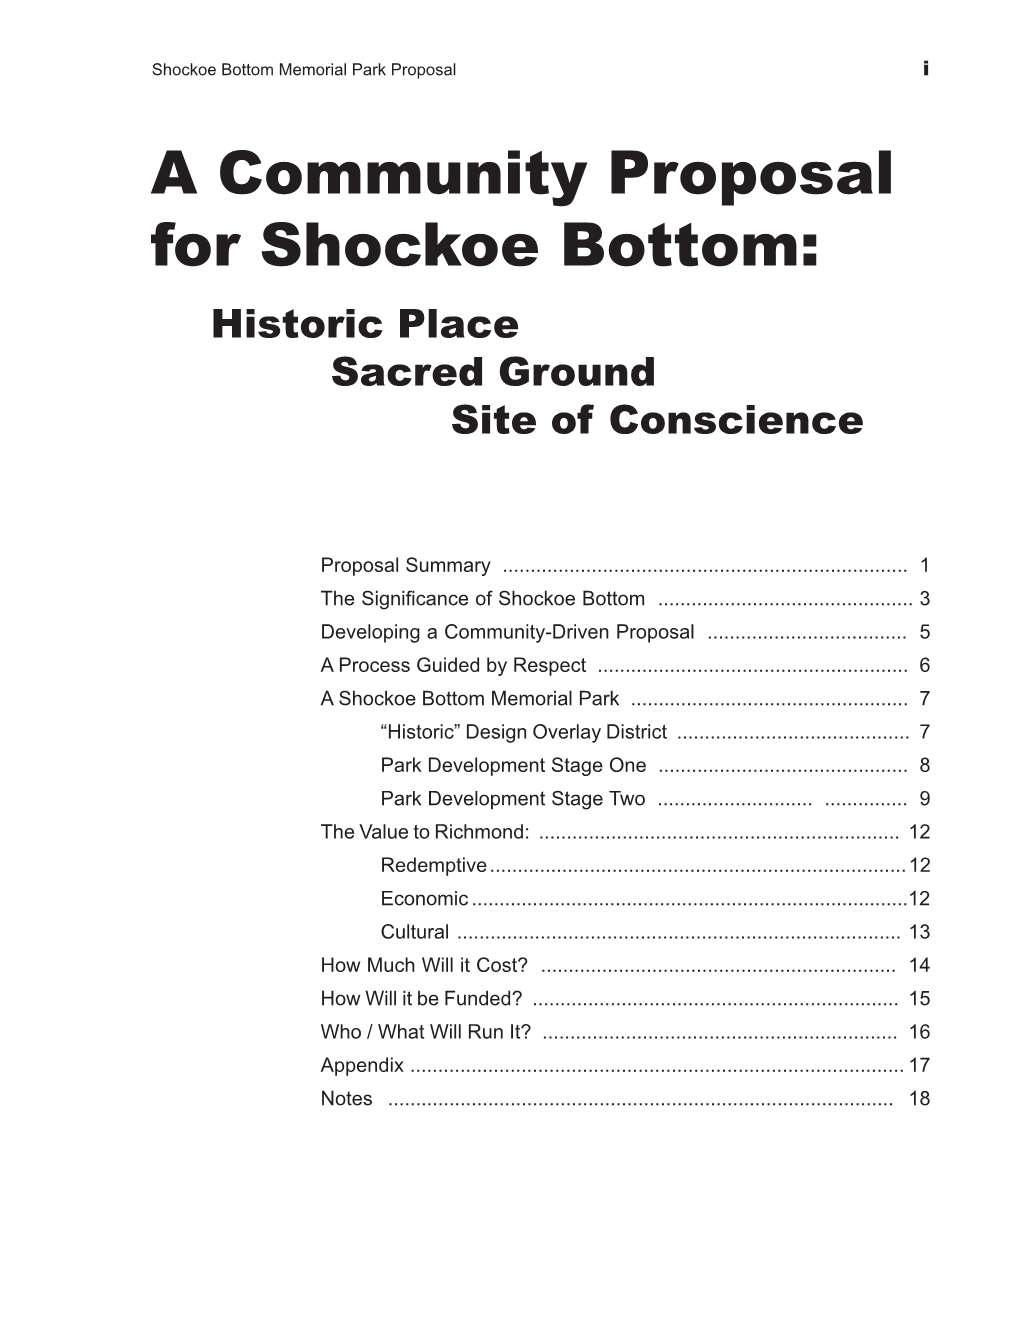 A Community Proposal for Shockoe Bottom: Historic Place Sacred Ground Site of Conscience